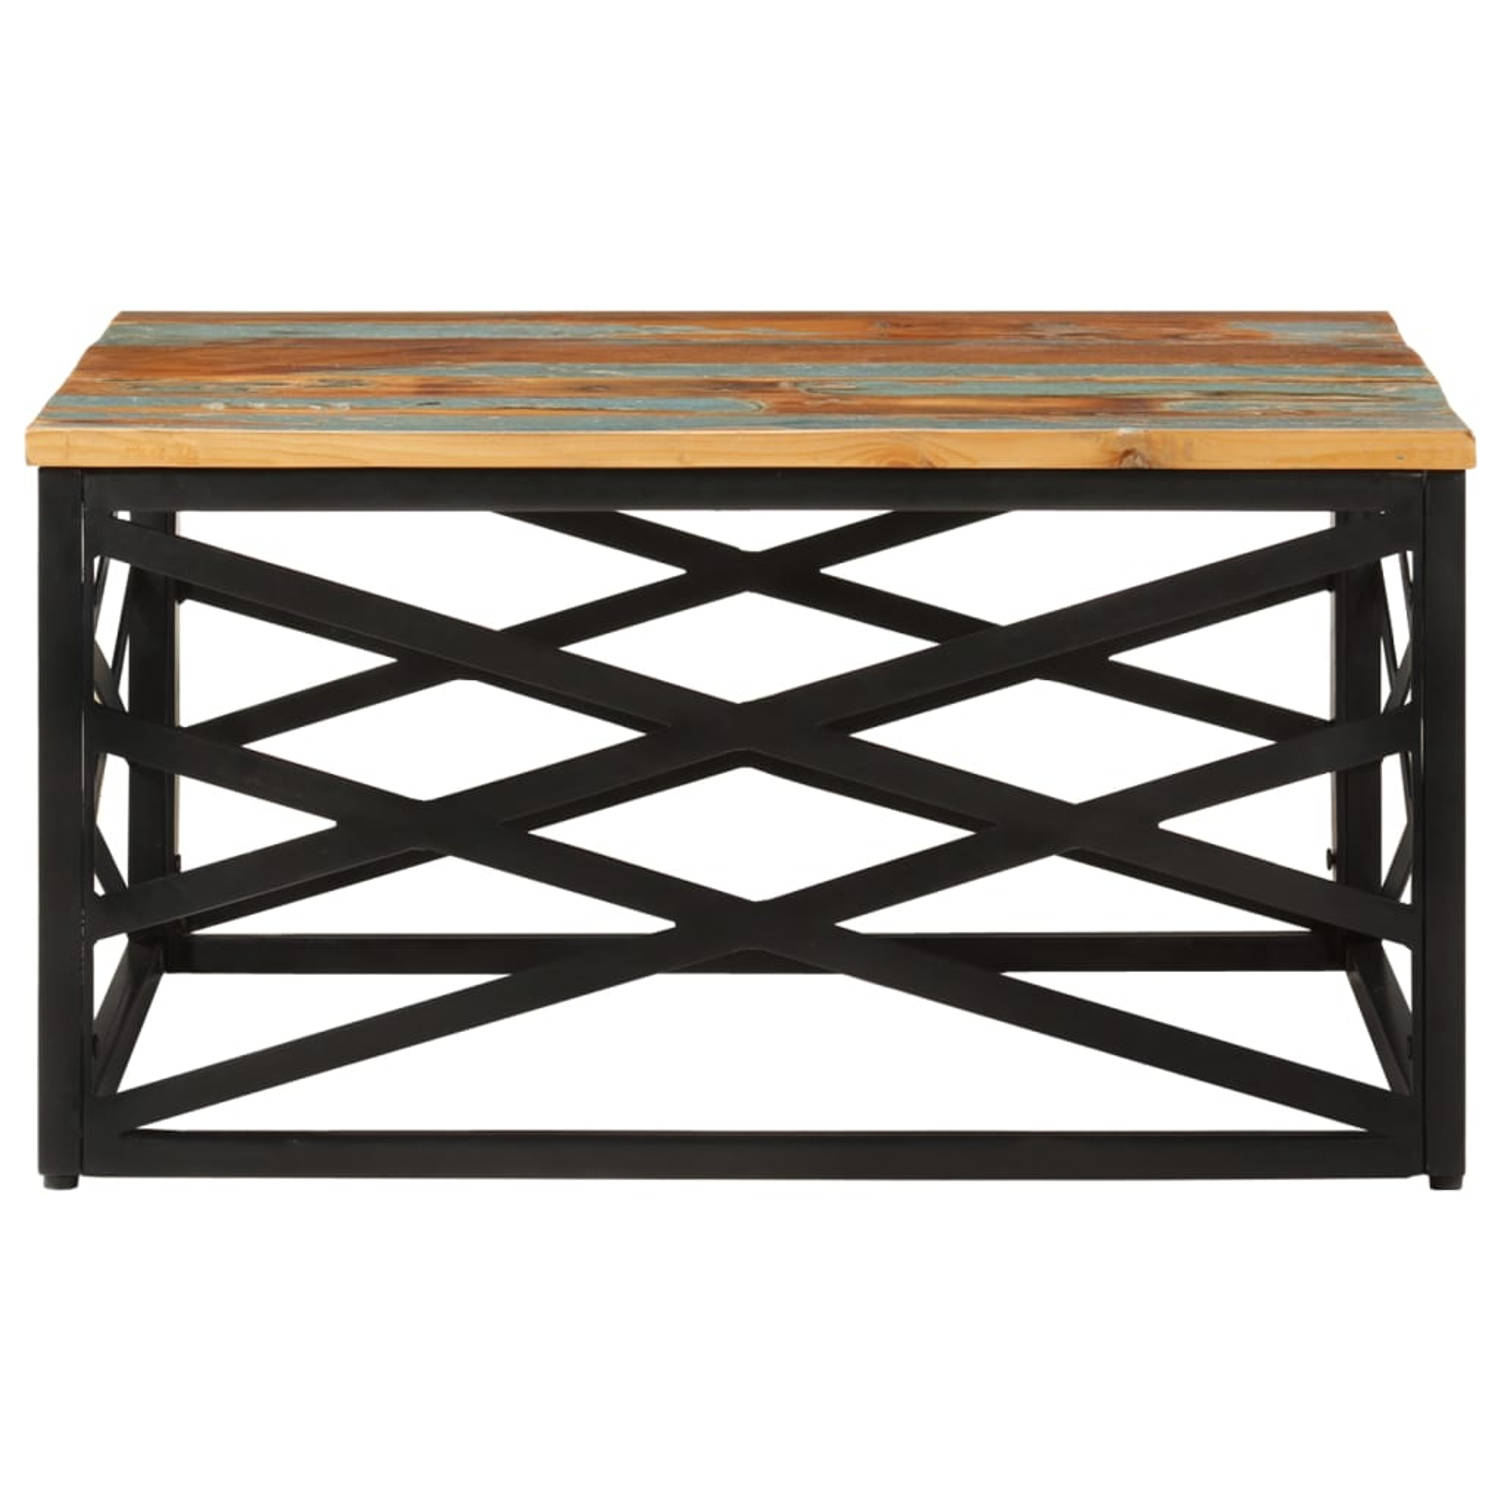 The Living Store Salontafel Industrial - 68 x 68 x 35 cm - Gerecycled Hout en Staal